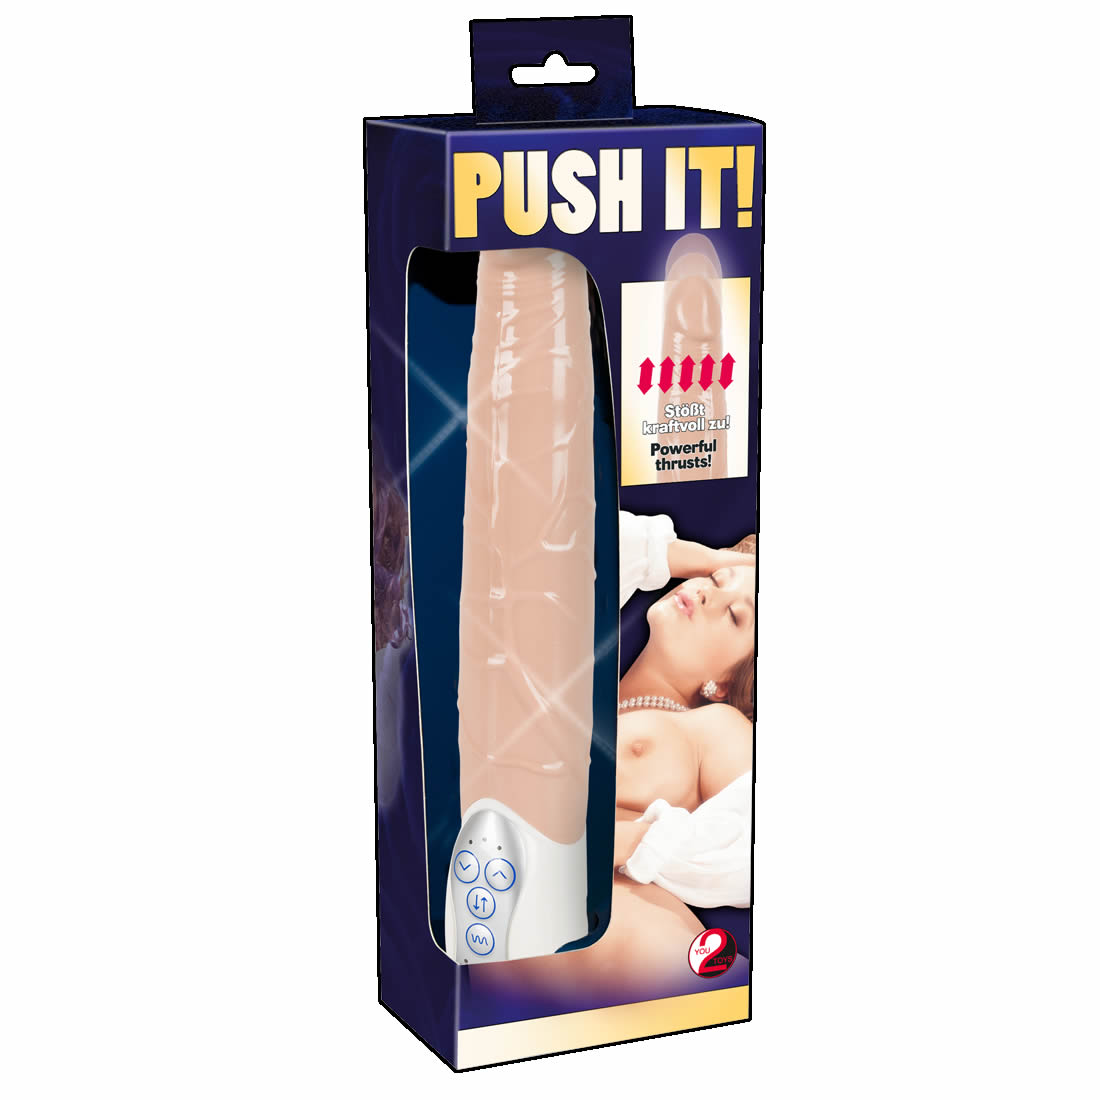 Push It Vibrator with Thrusting Function